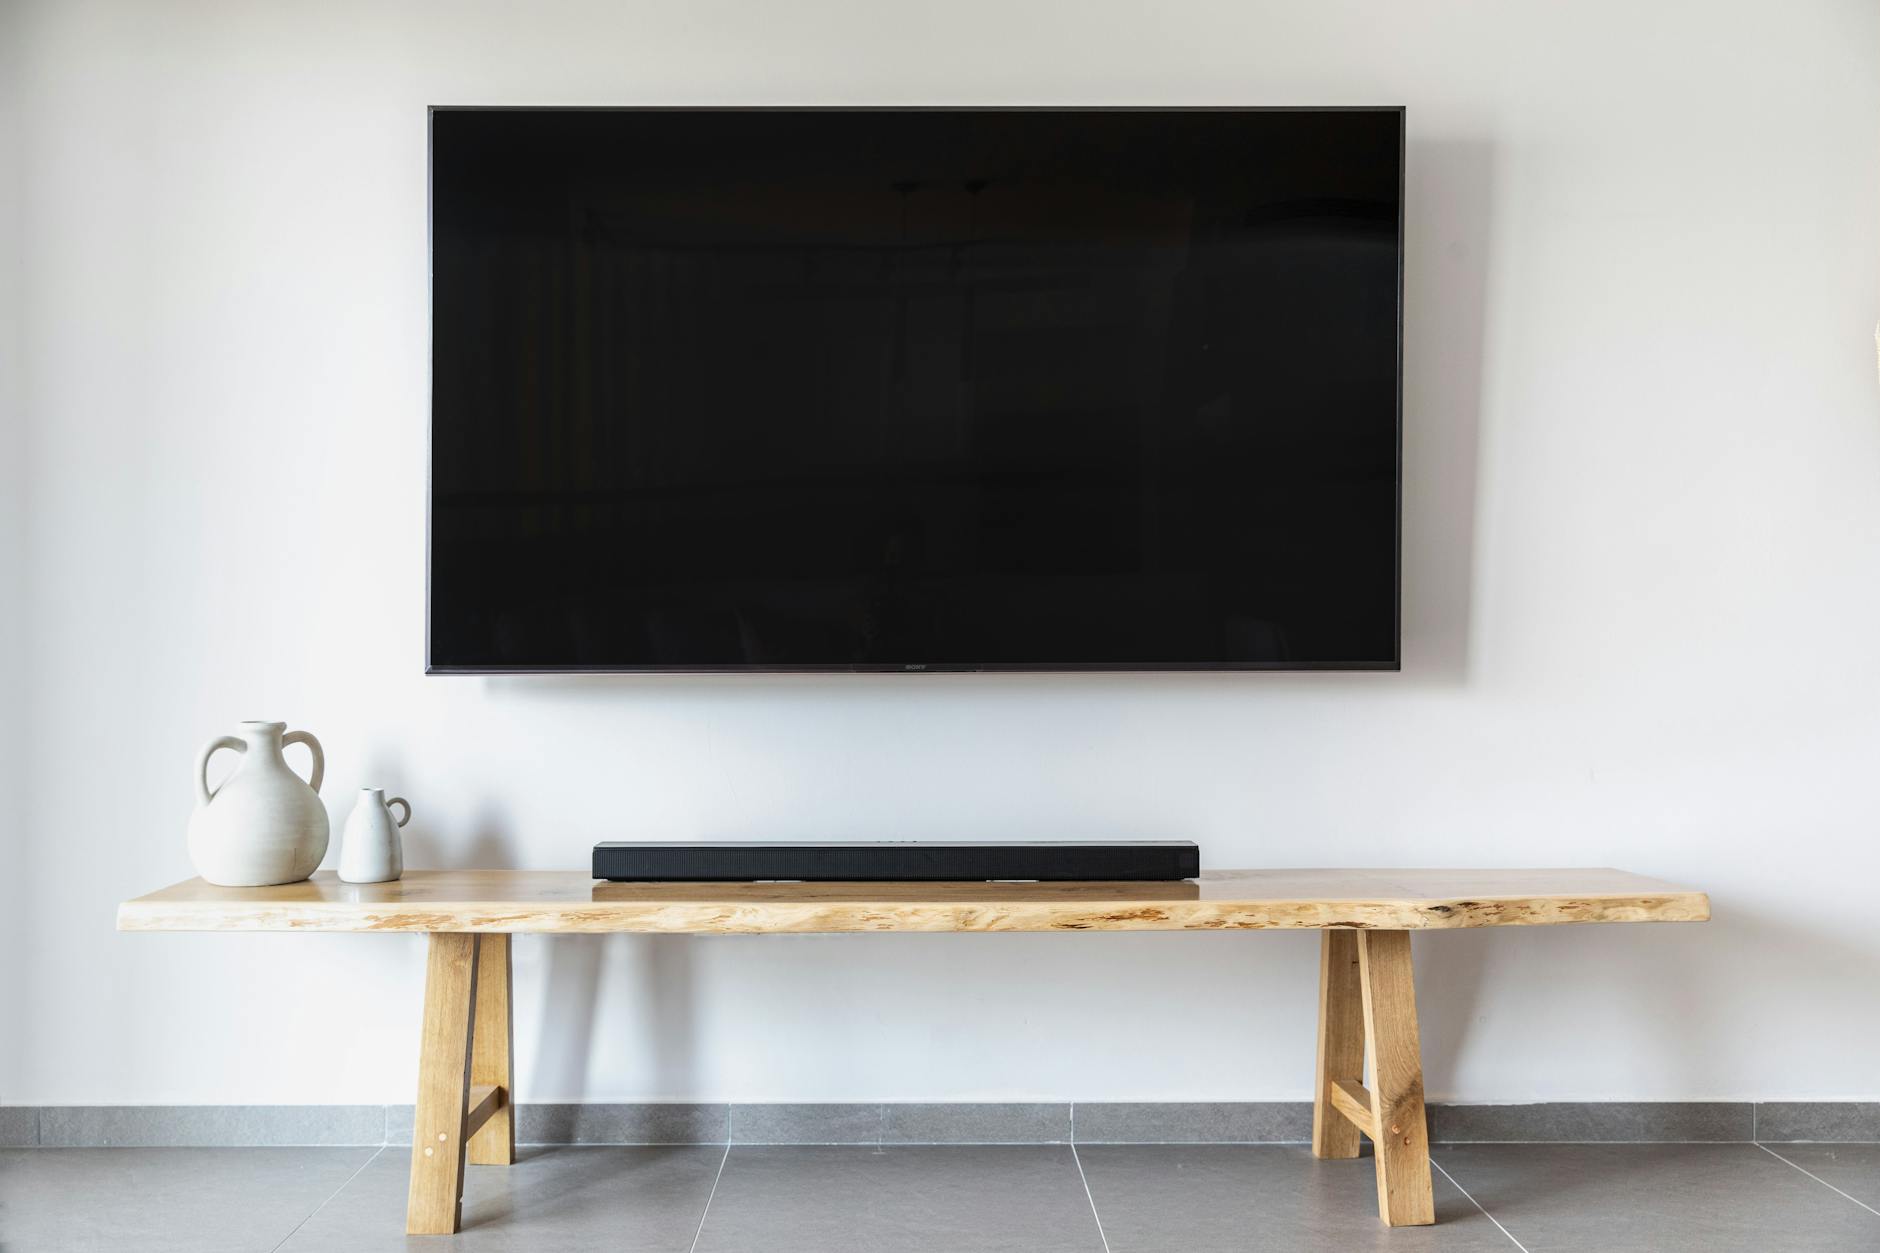 Best TV Mount for a Clean, Minimalist Look